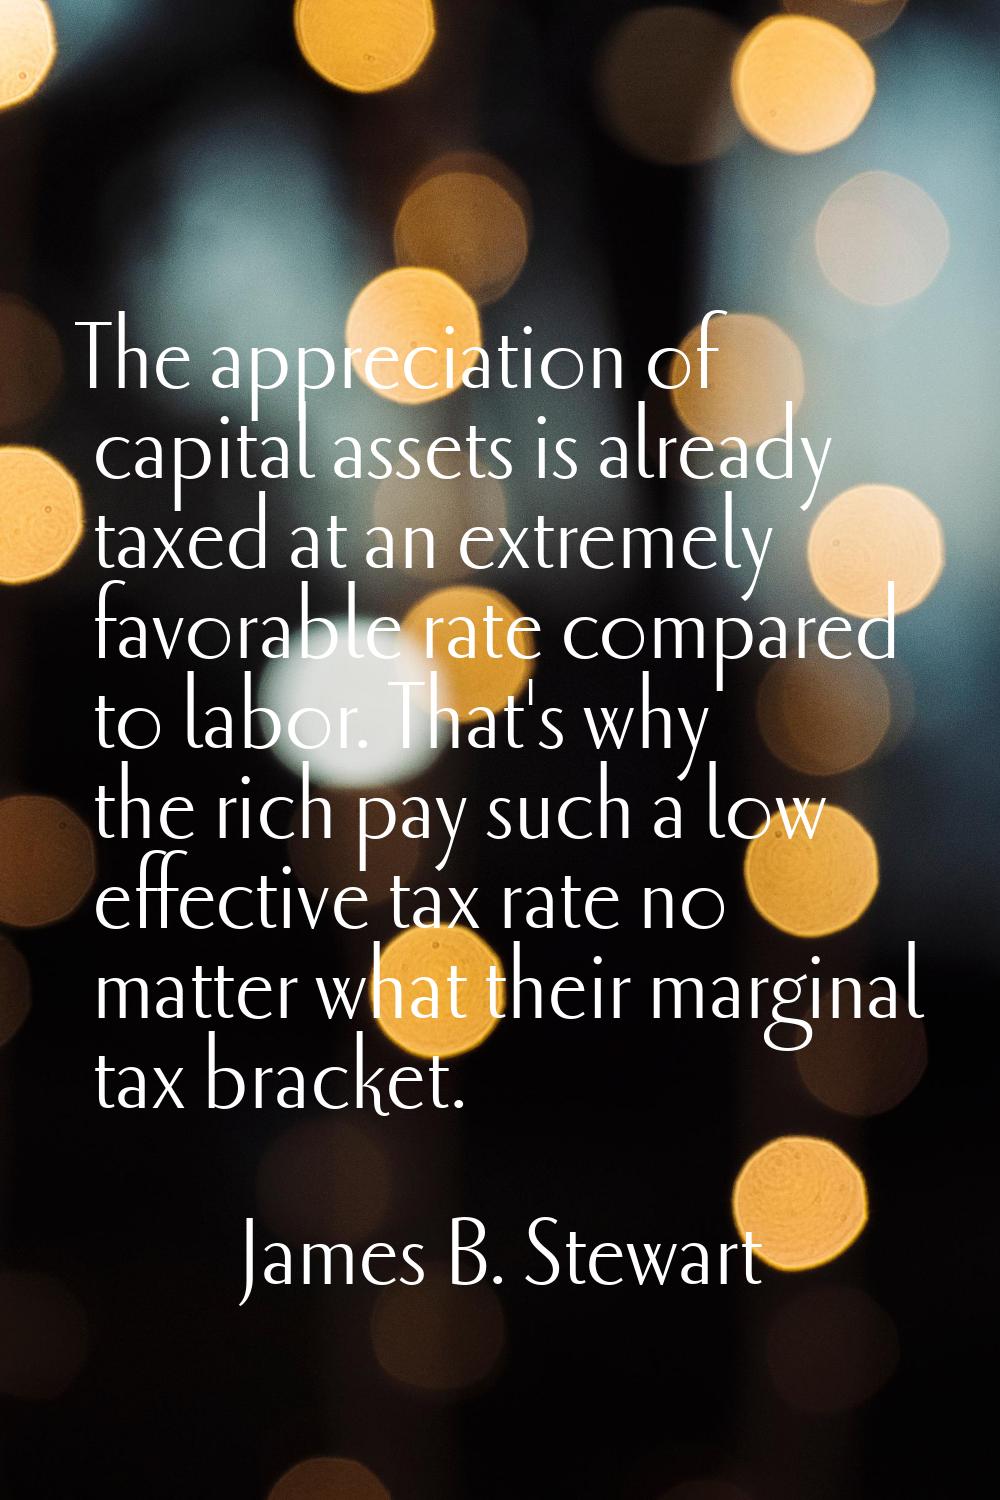 The appreciation of capital assets is already taxed at an extremely favorable rate compared to labo